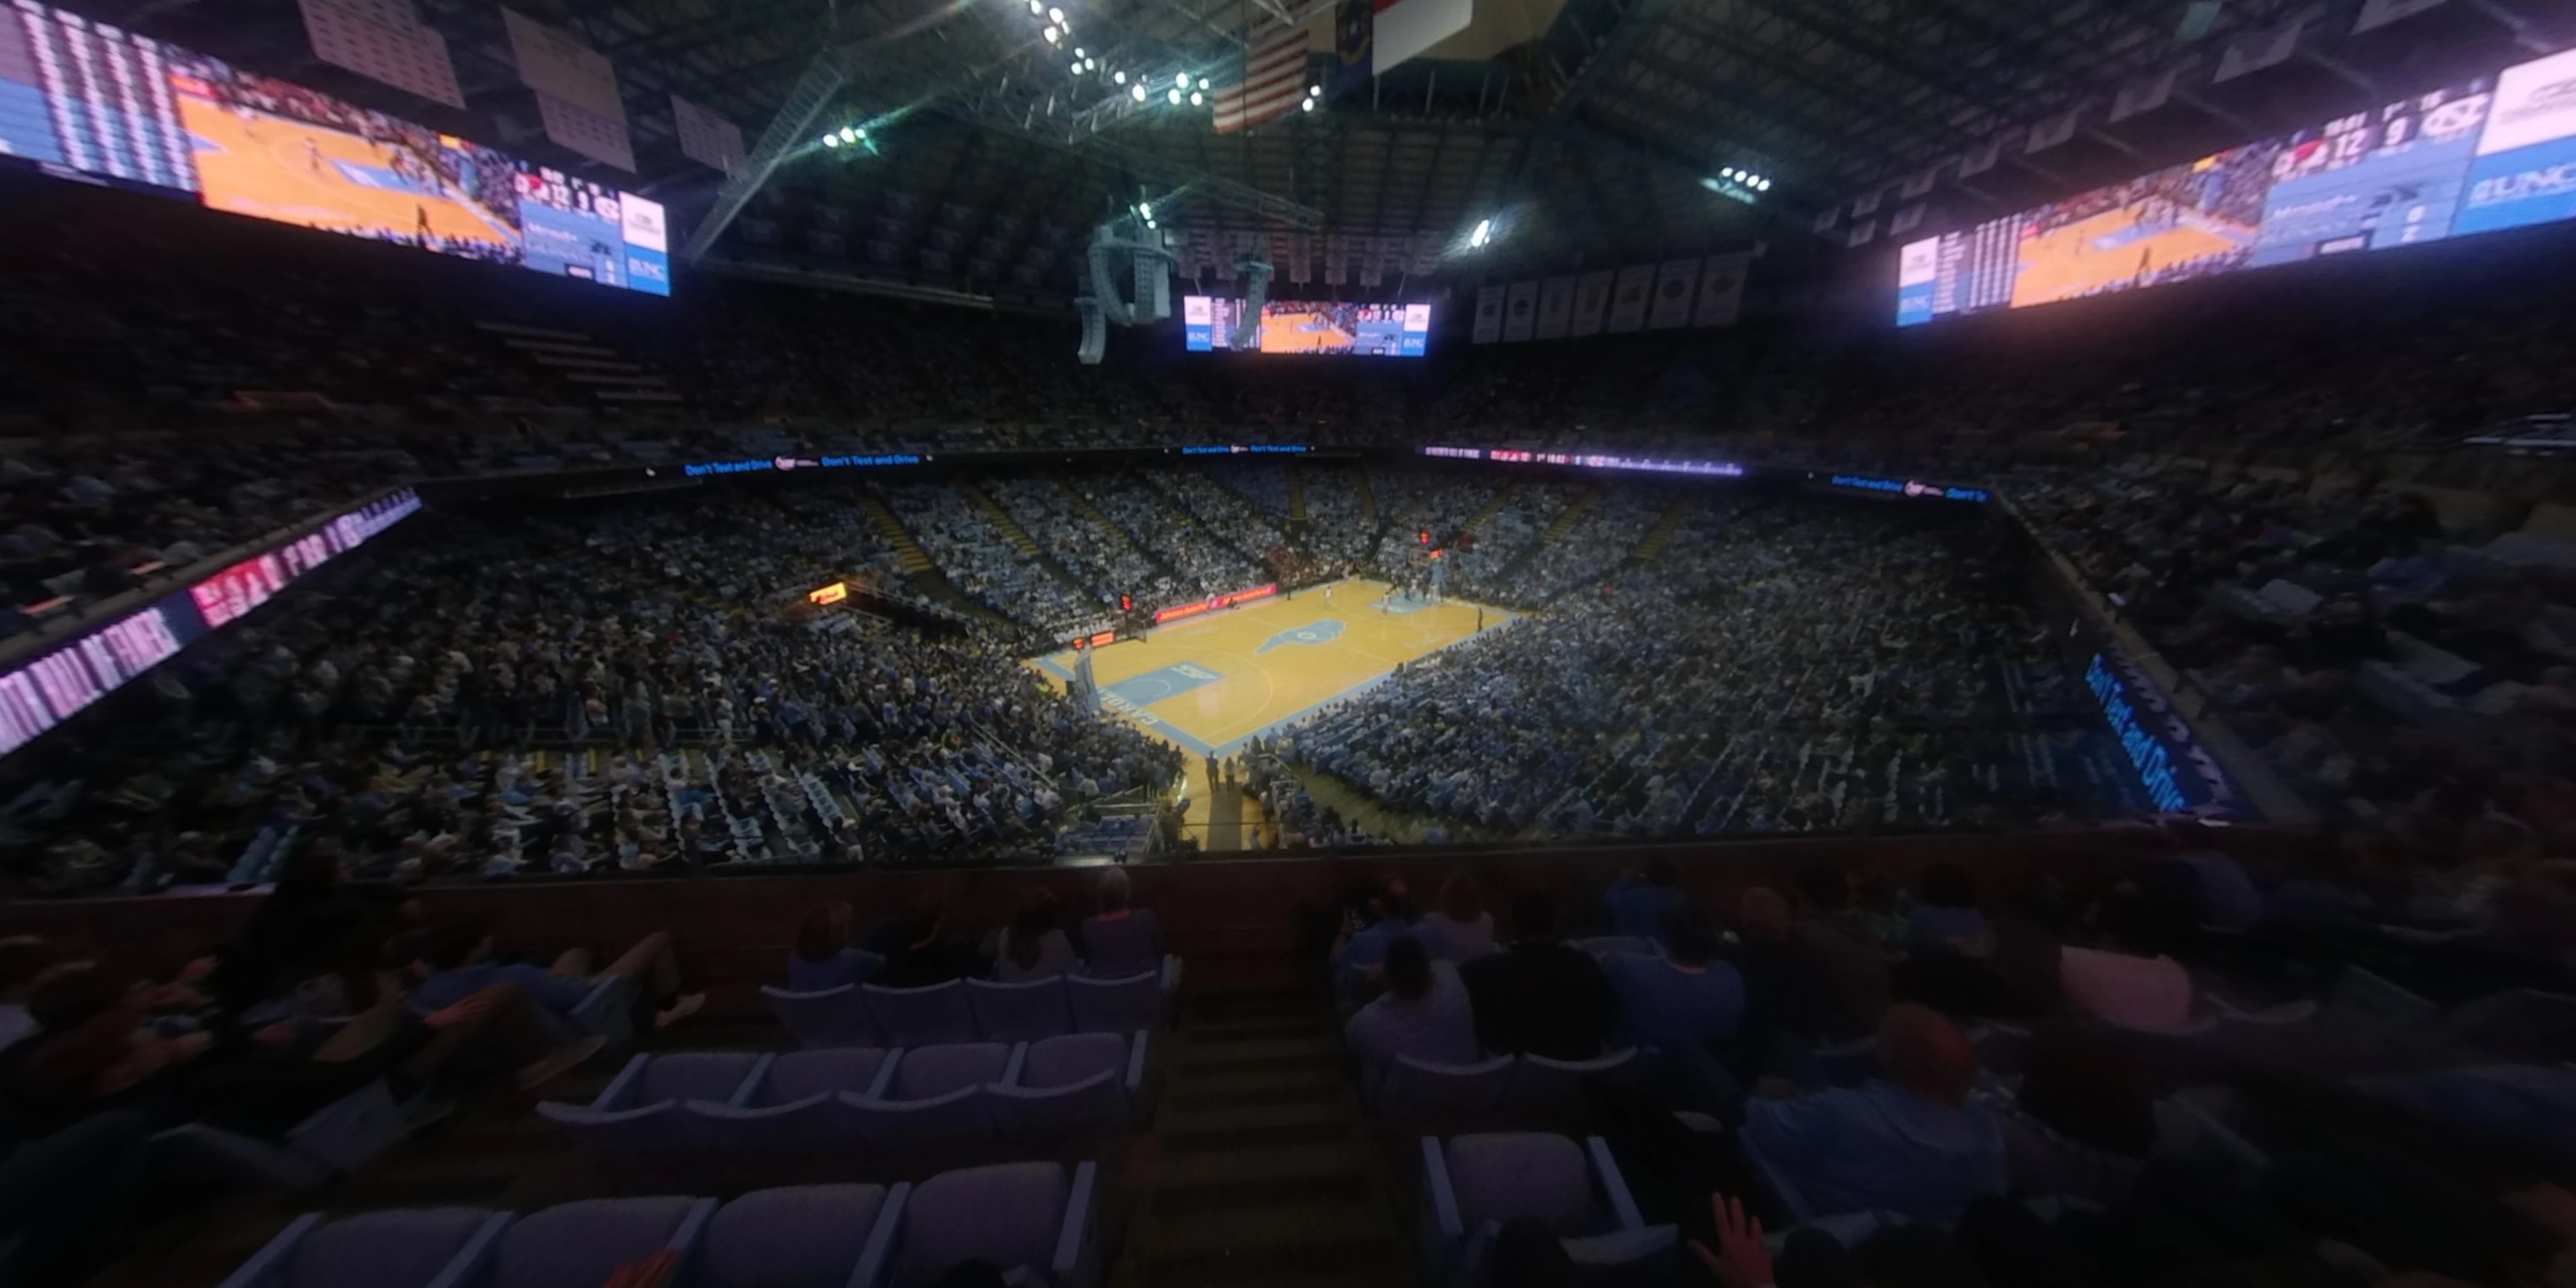 Section 220 at Dean Smith Center - RateYourSeats.com